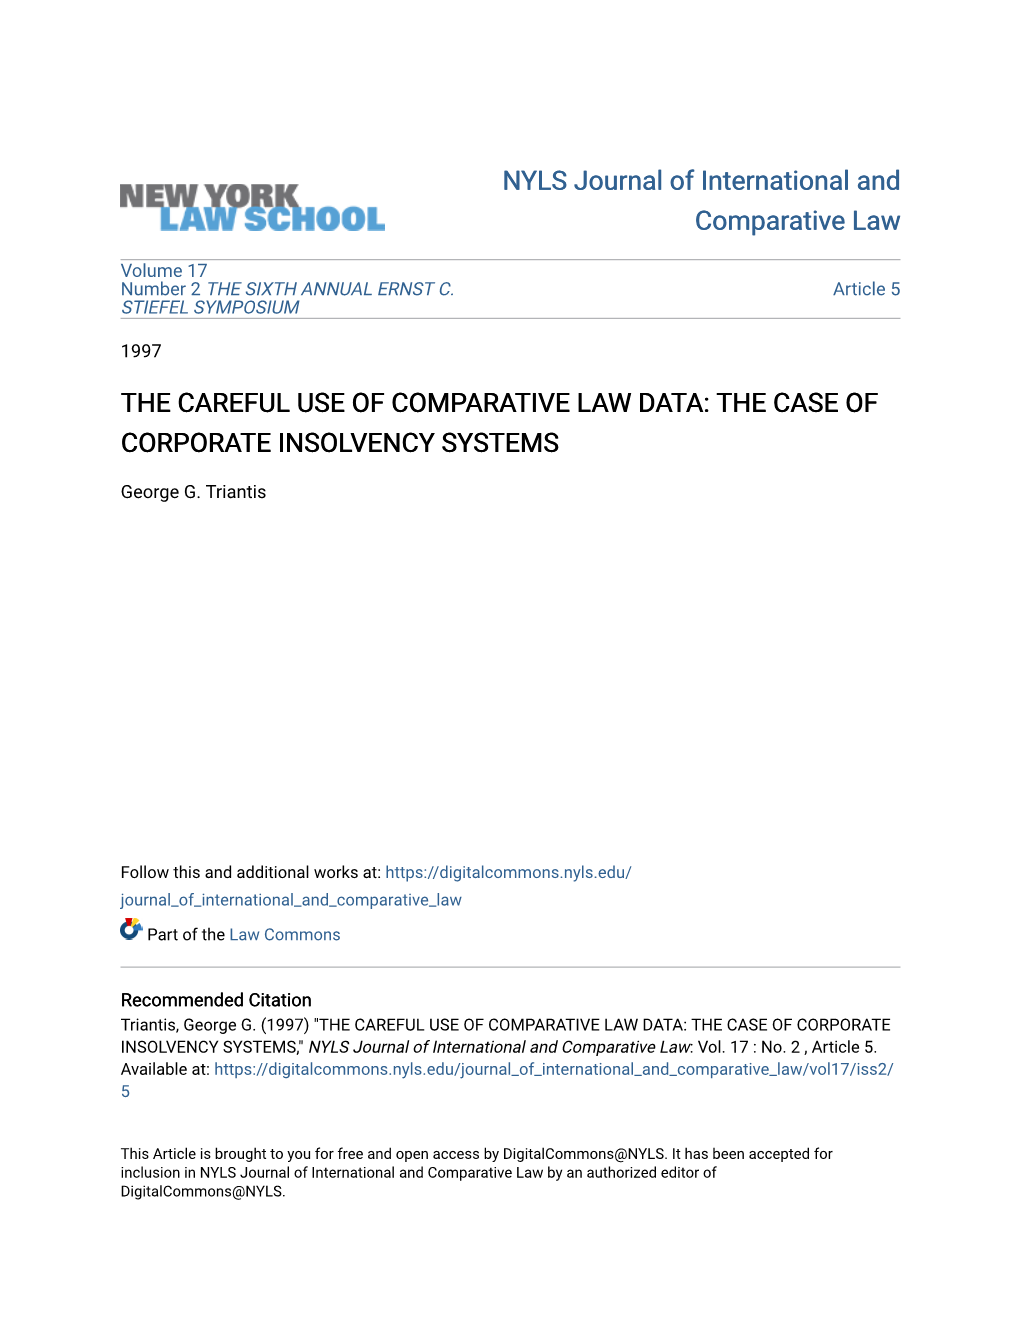 The Careful Use of Comparative Law Data: the Case of Corporate Insolvency Systems